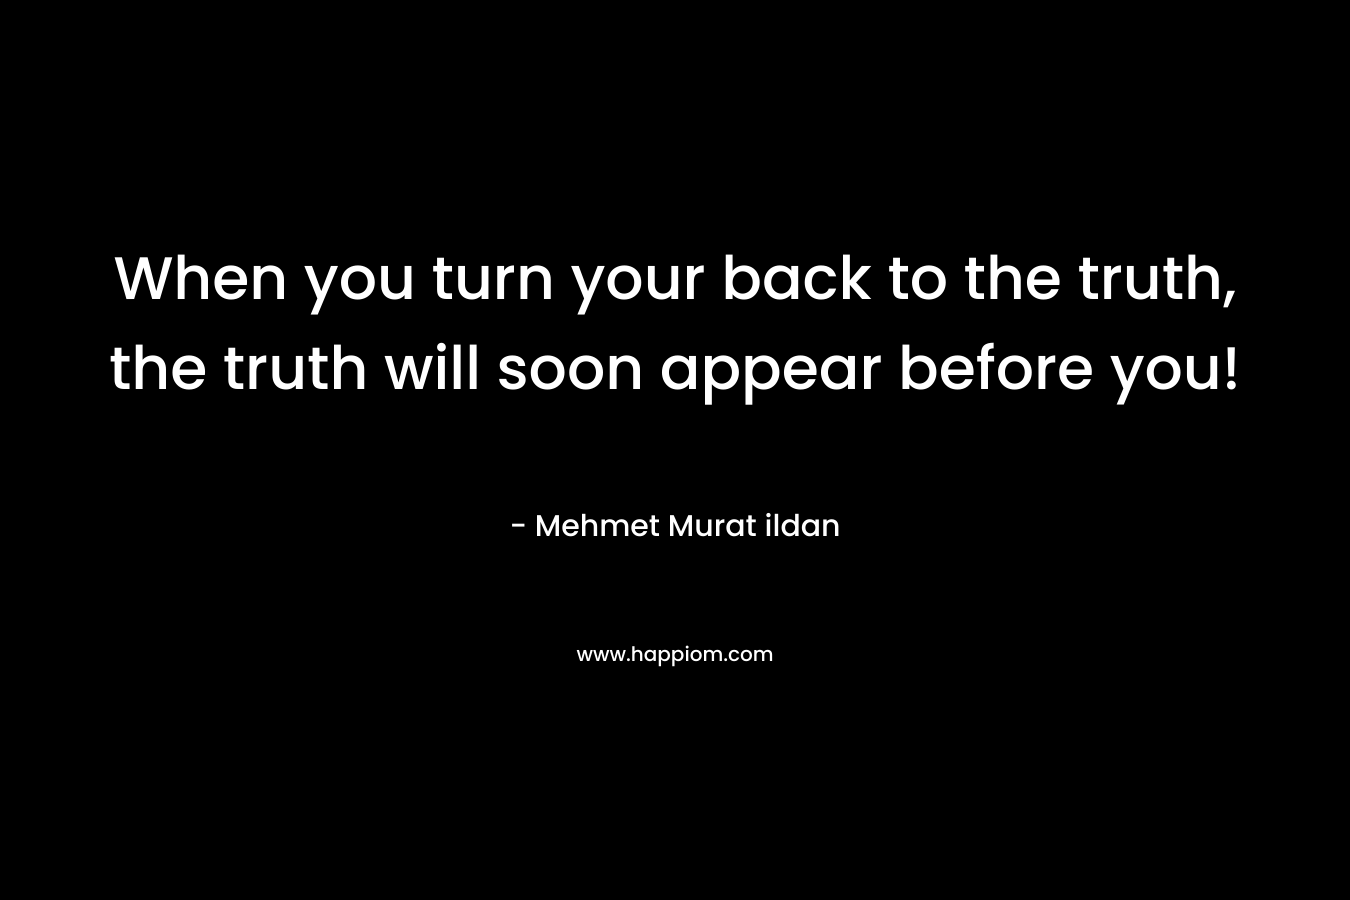 When you turn your back to the truth, the truth will soon appear before you! – Mehmet Murat ildan